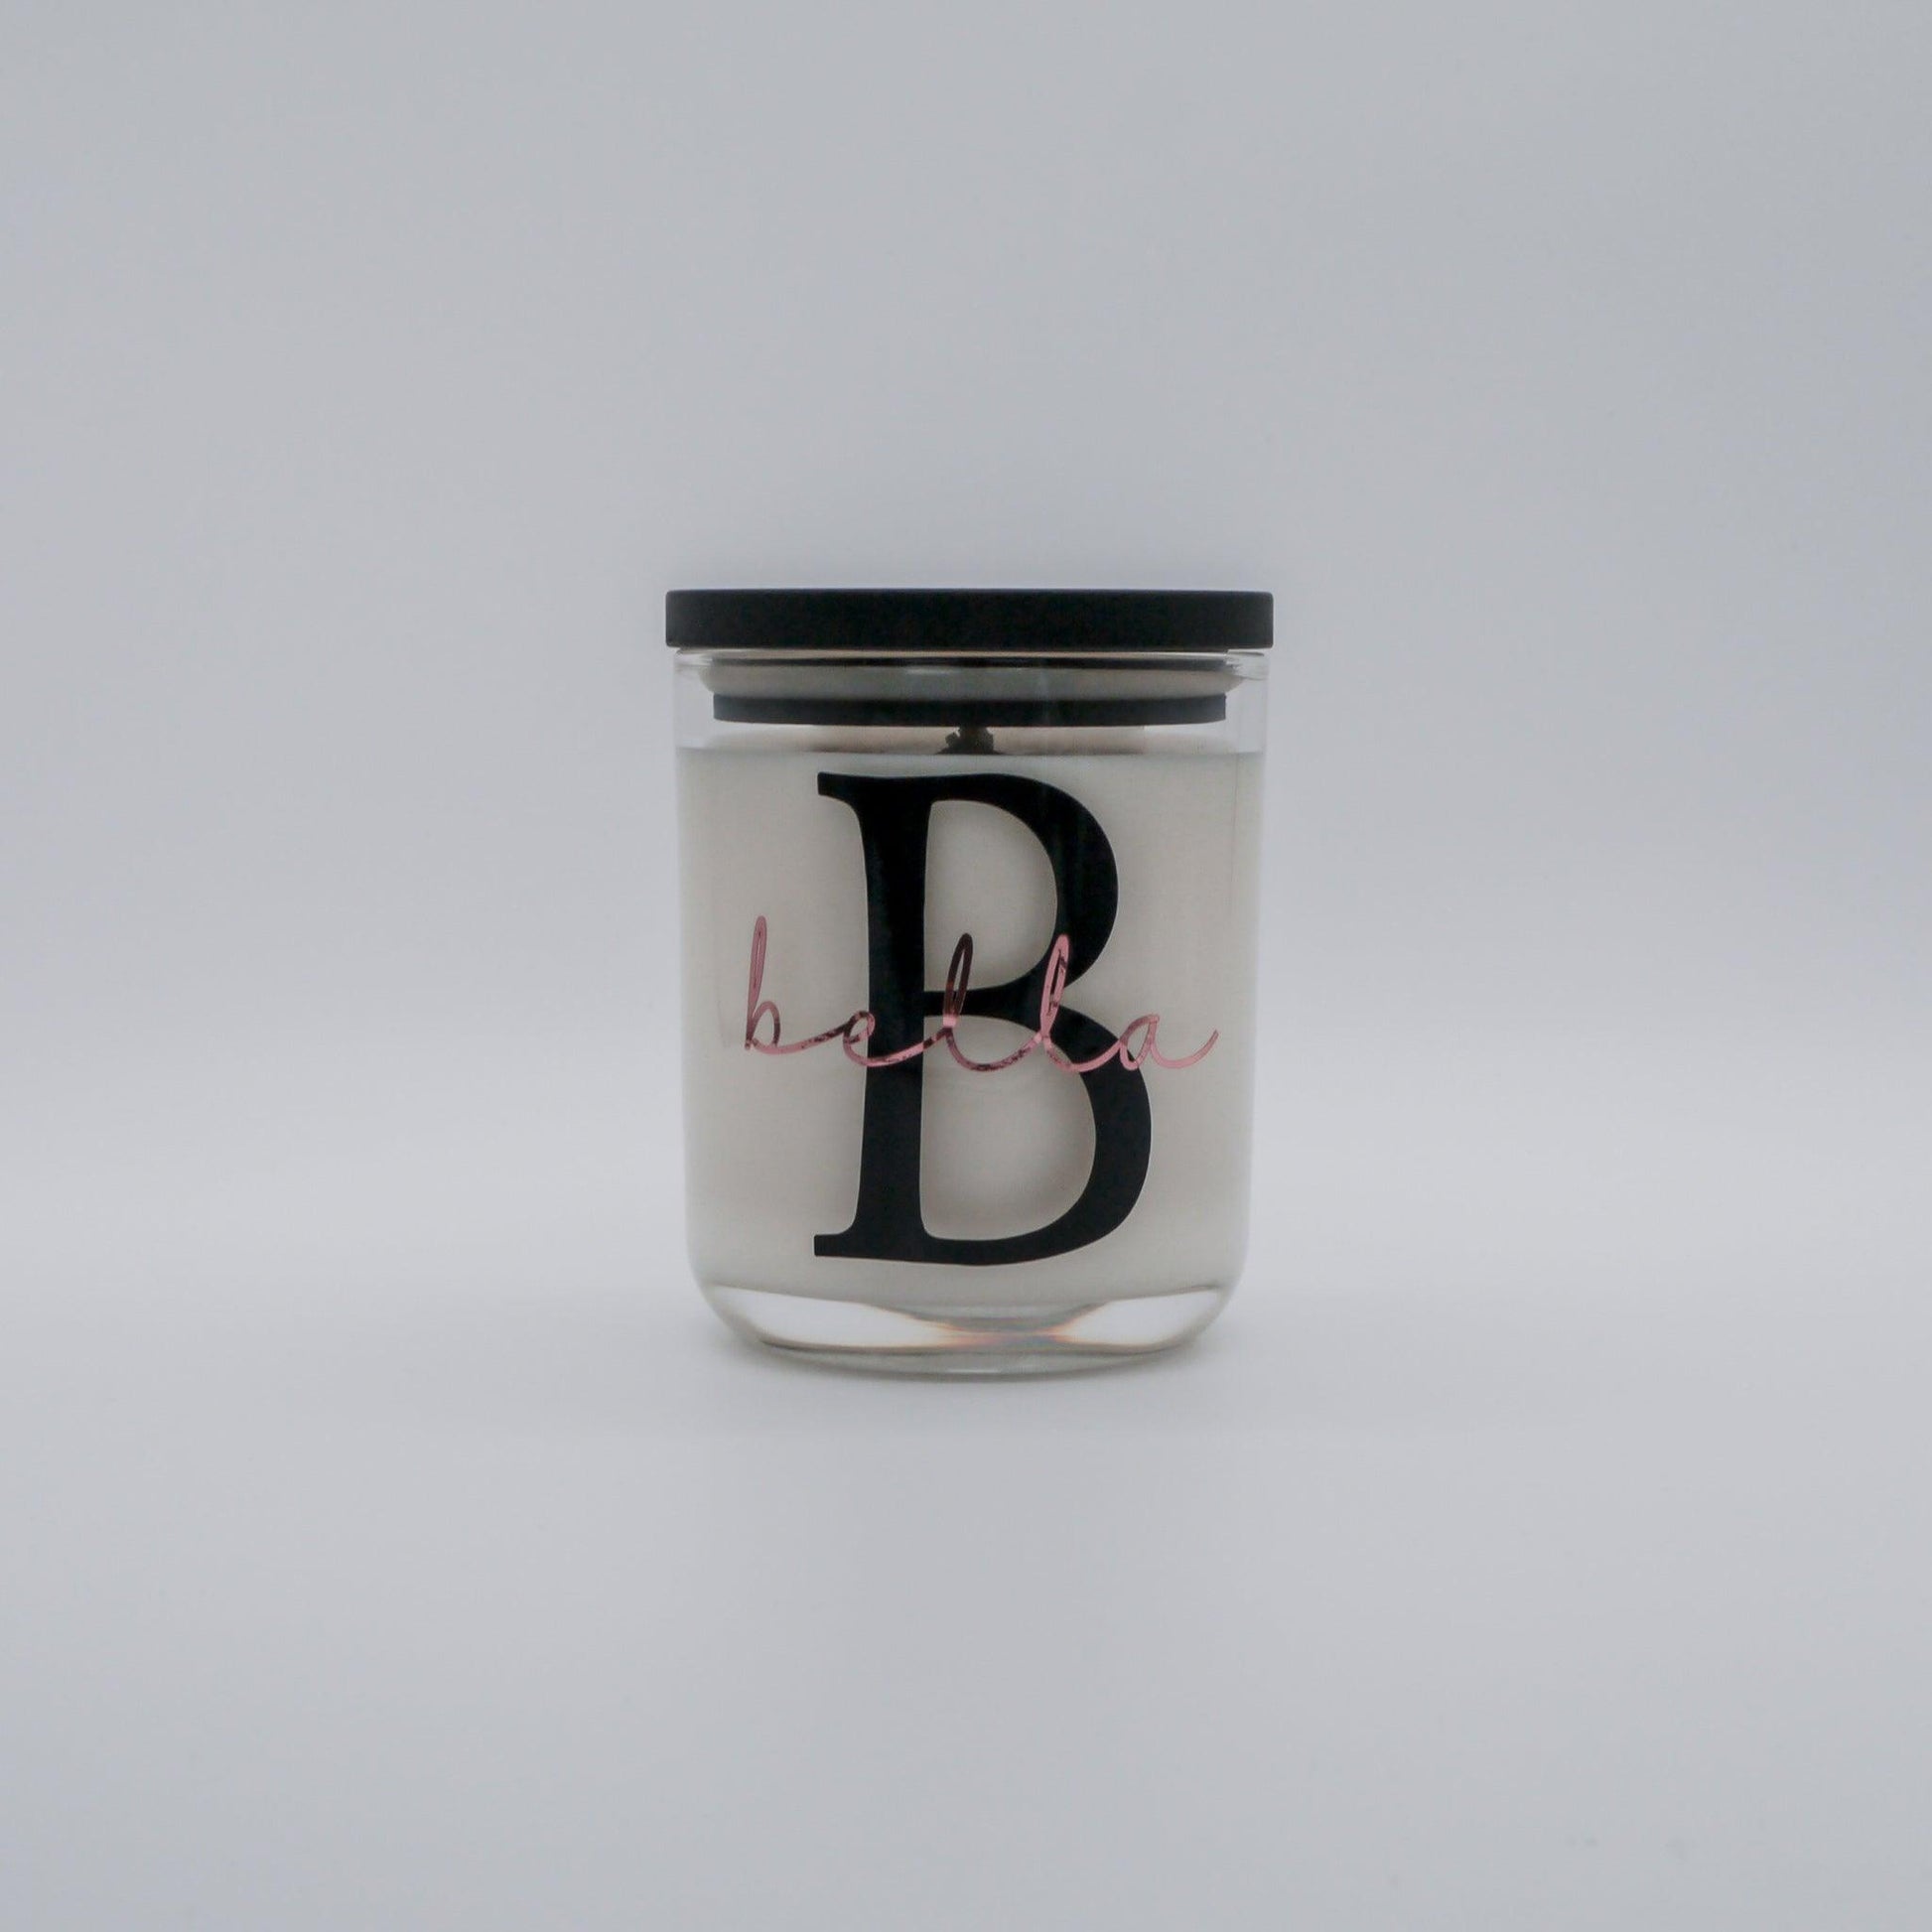 Personalise your own Candle | Customised Candles